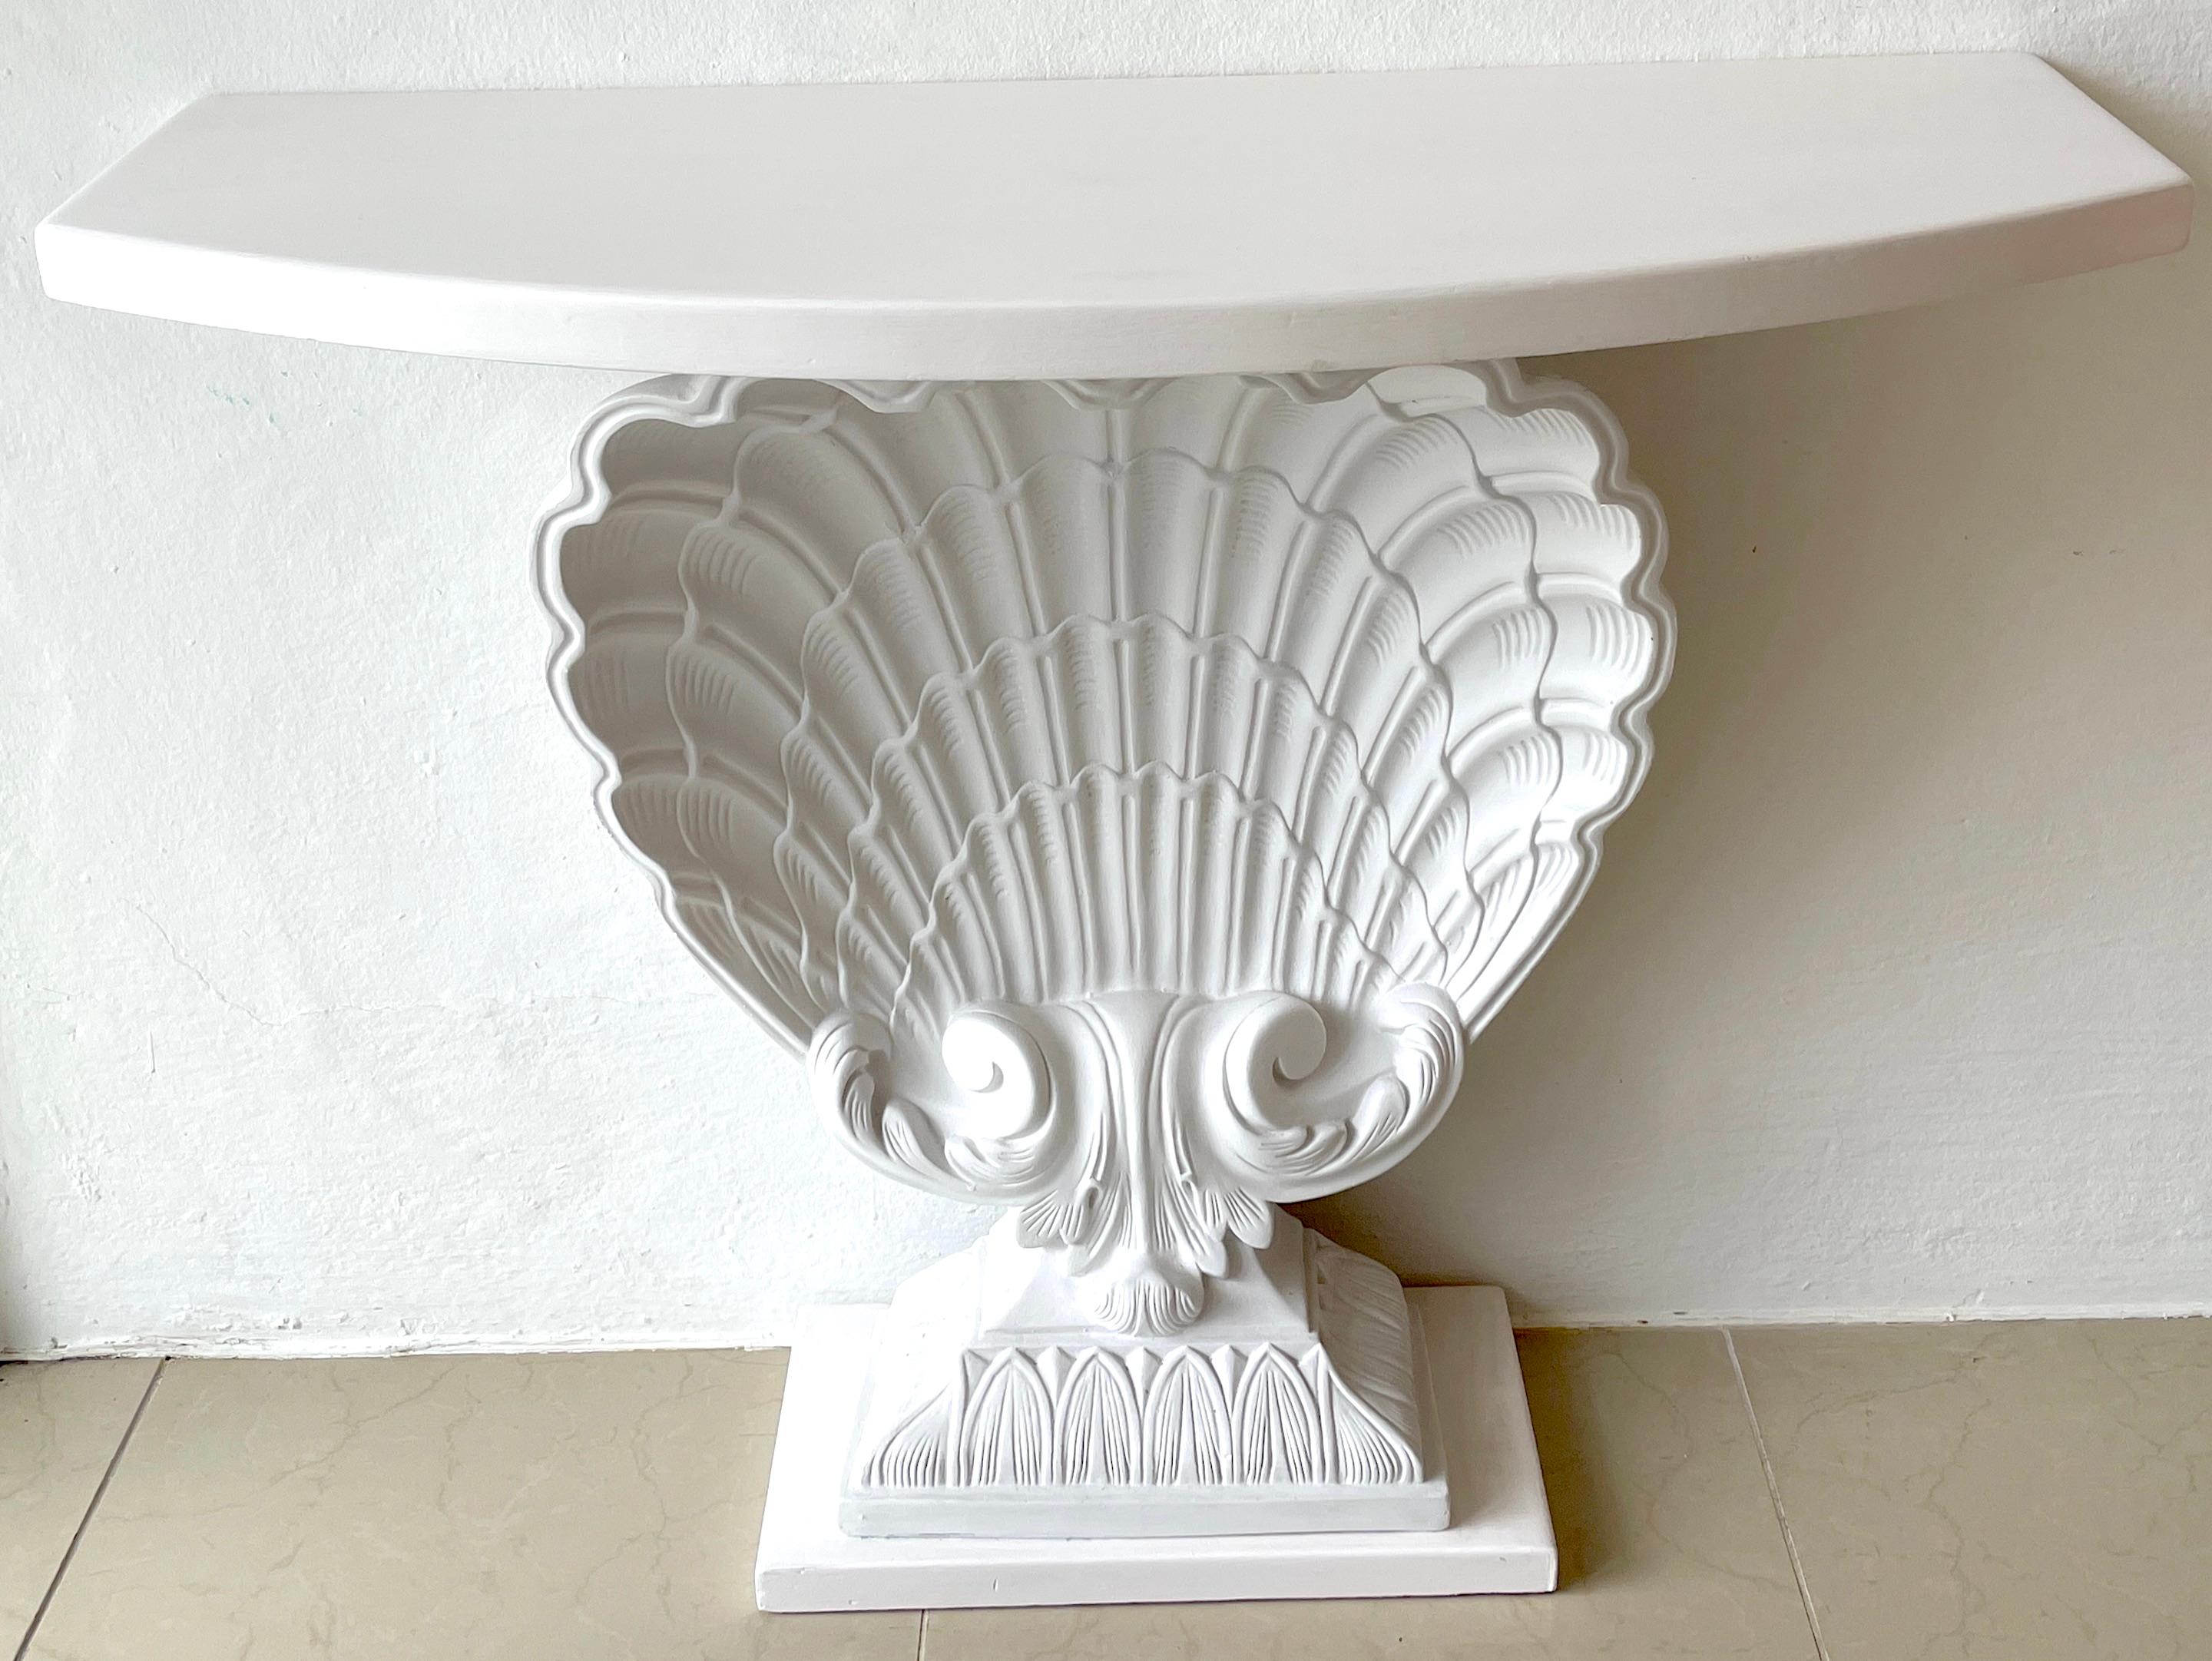 White lacquered shell console by Grosfeld House, restored
An exceptional period example with high relief carving, newly lacquered. 
Console measures 38